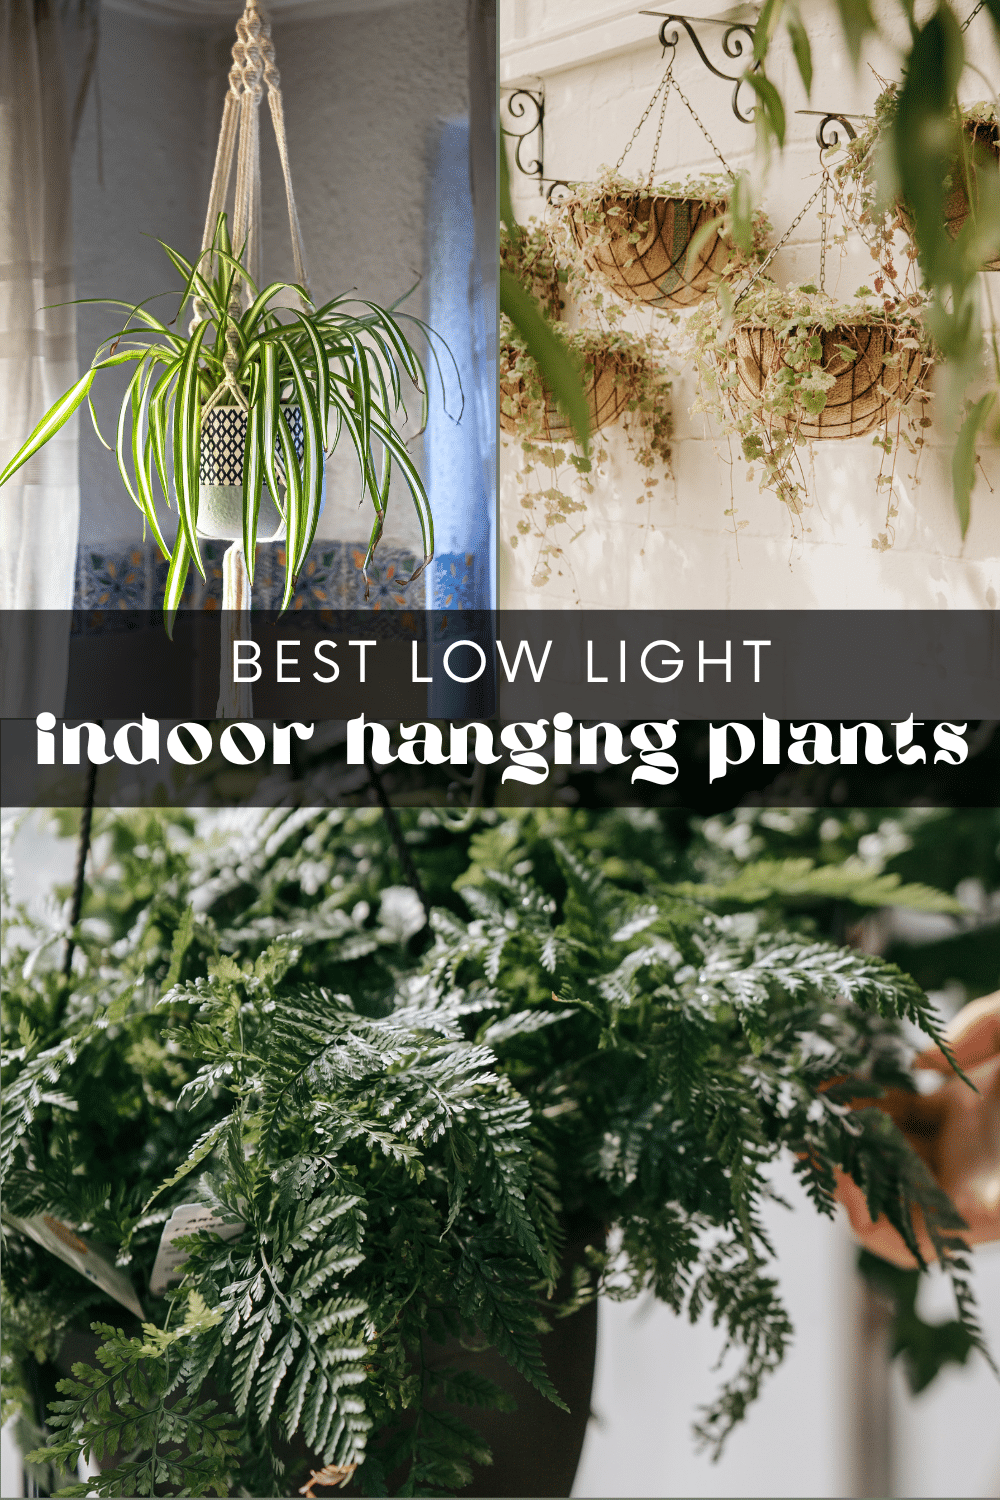 Indoor hanging plants add a touch of beauty and freshness to any living space - whether it's your home or workplace. However, not all indoor spaces receive ample natural light, making it challenging to choose the right plants that’ll thrive in low-light conditions. 